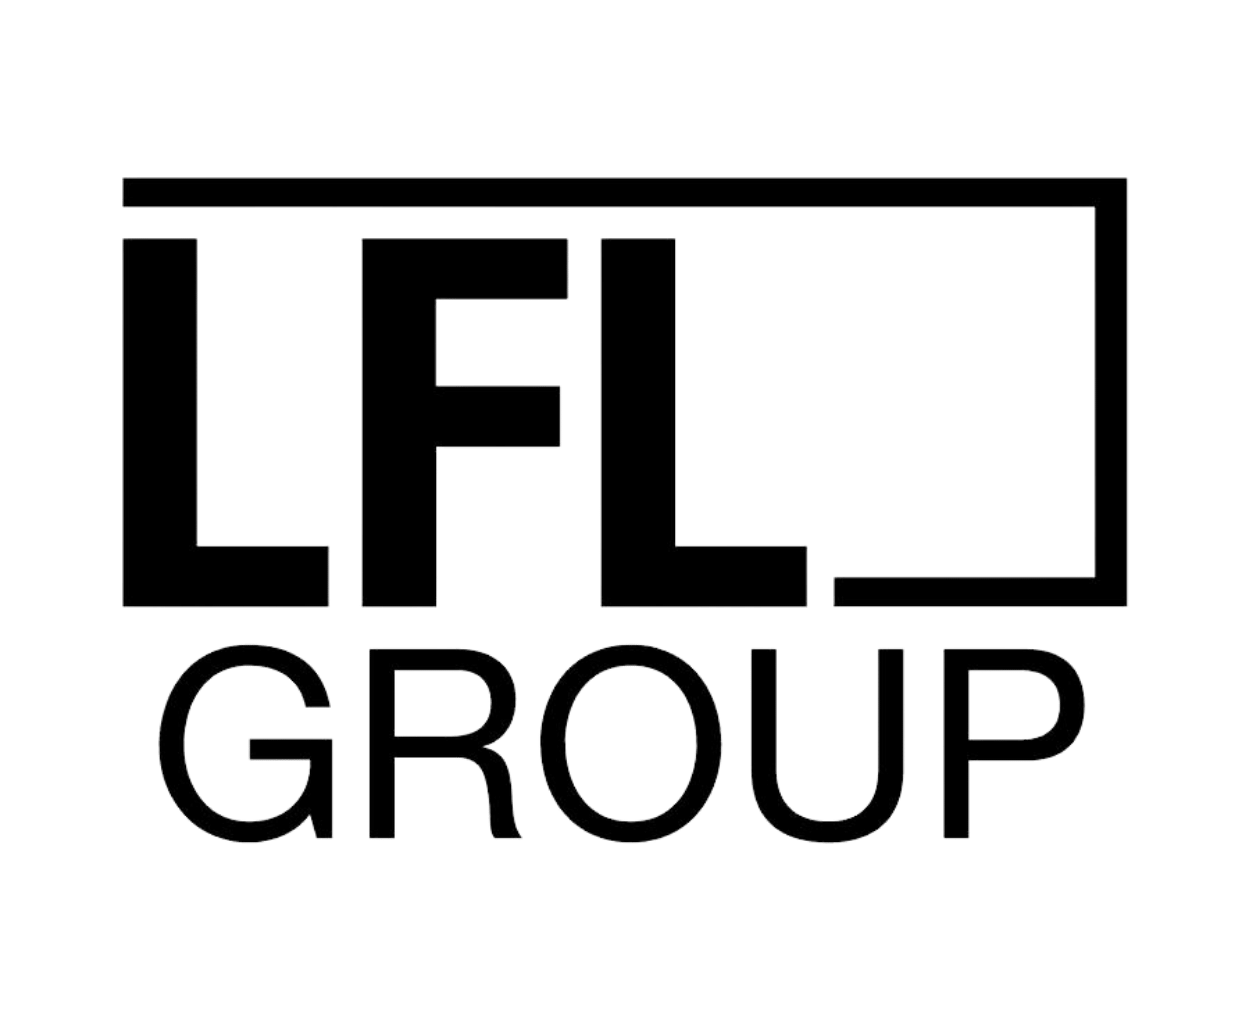 The image shows a bold, minimalist logo with the letters "lfl group" prominently displayed in a modern, sans-serif typeface. The design is monochrome, creating a sleek and professional look for